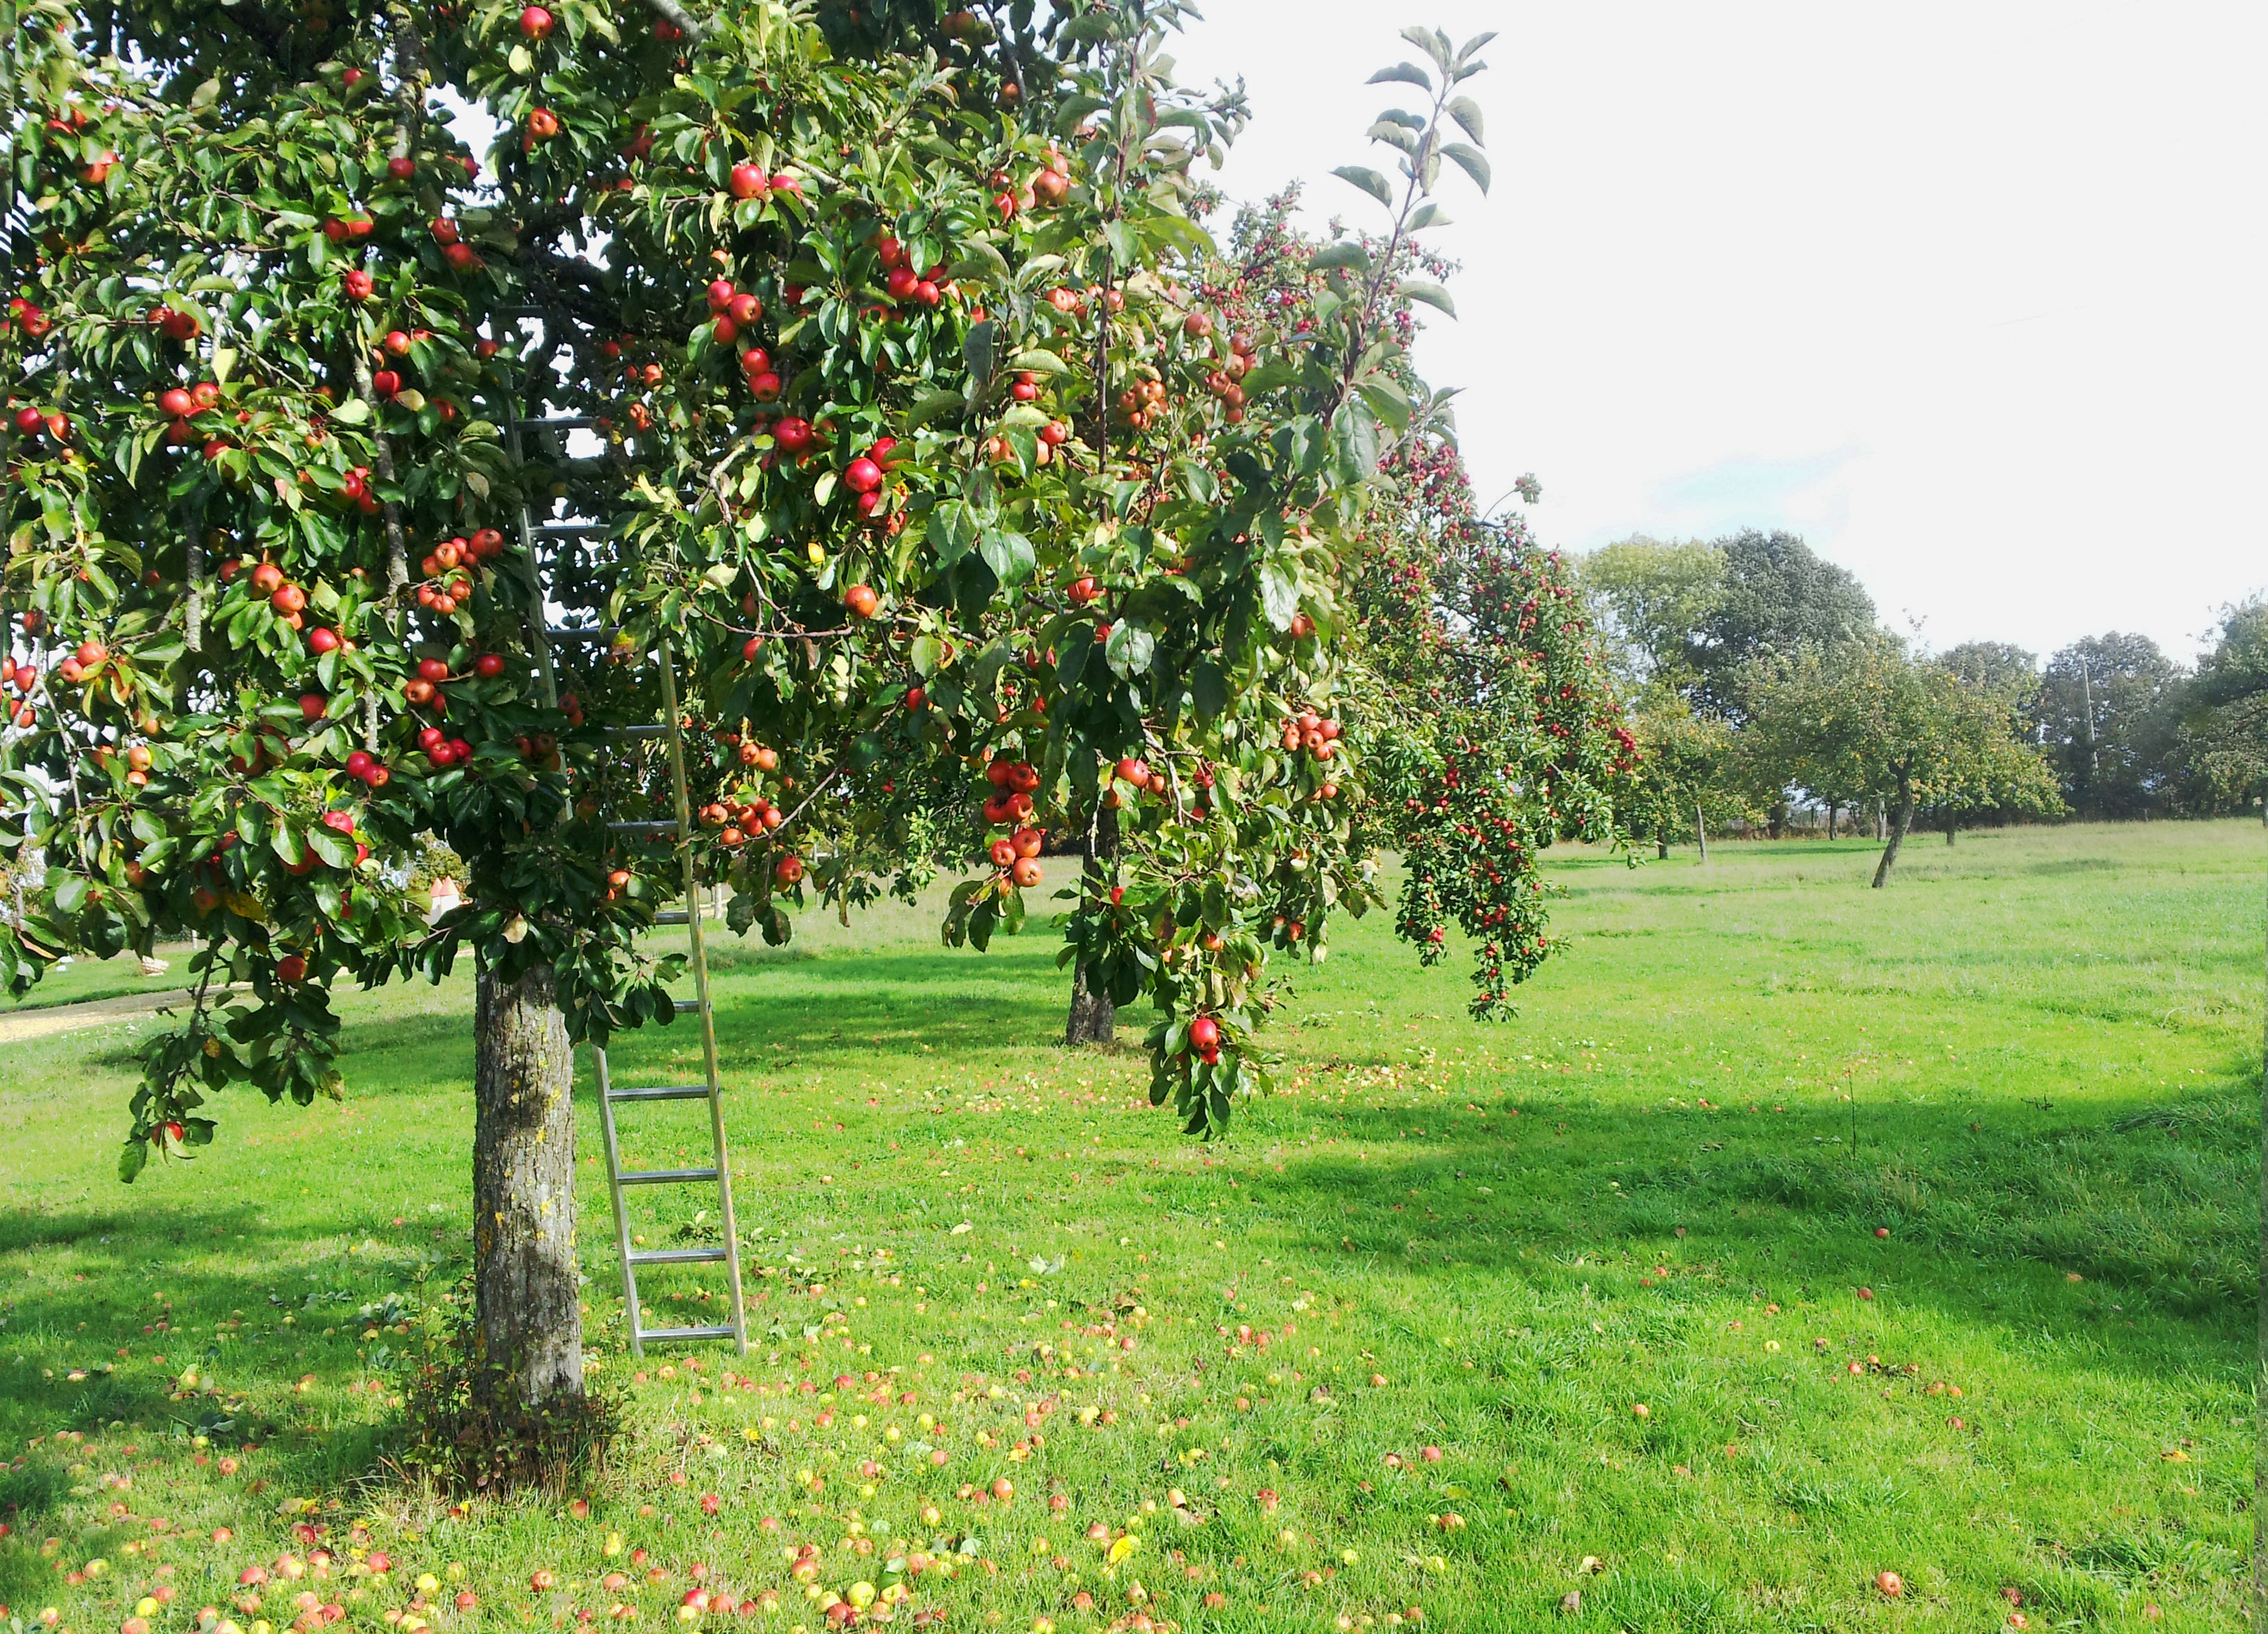 An apple tree picture